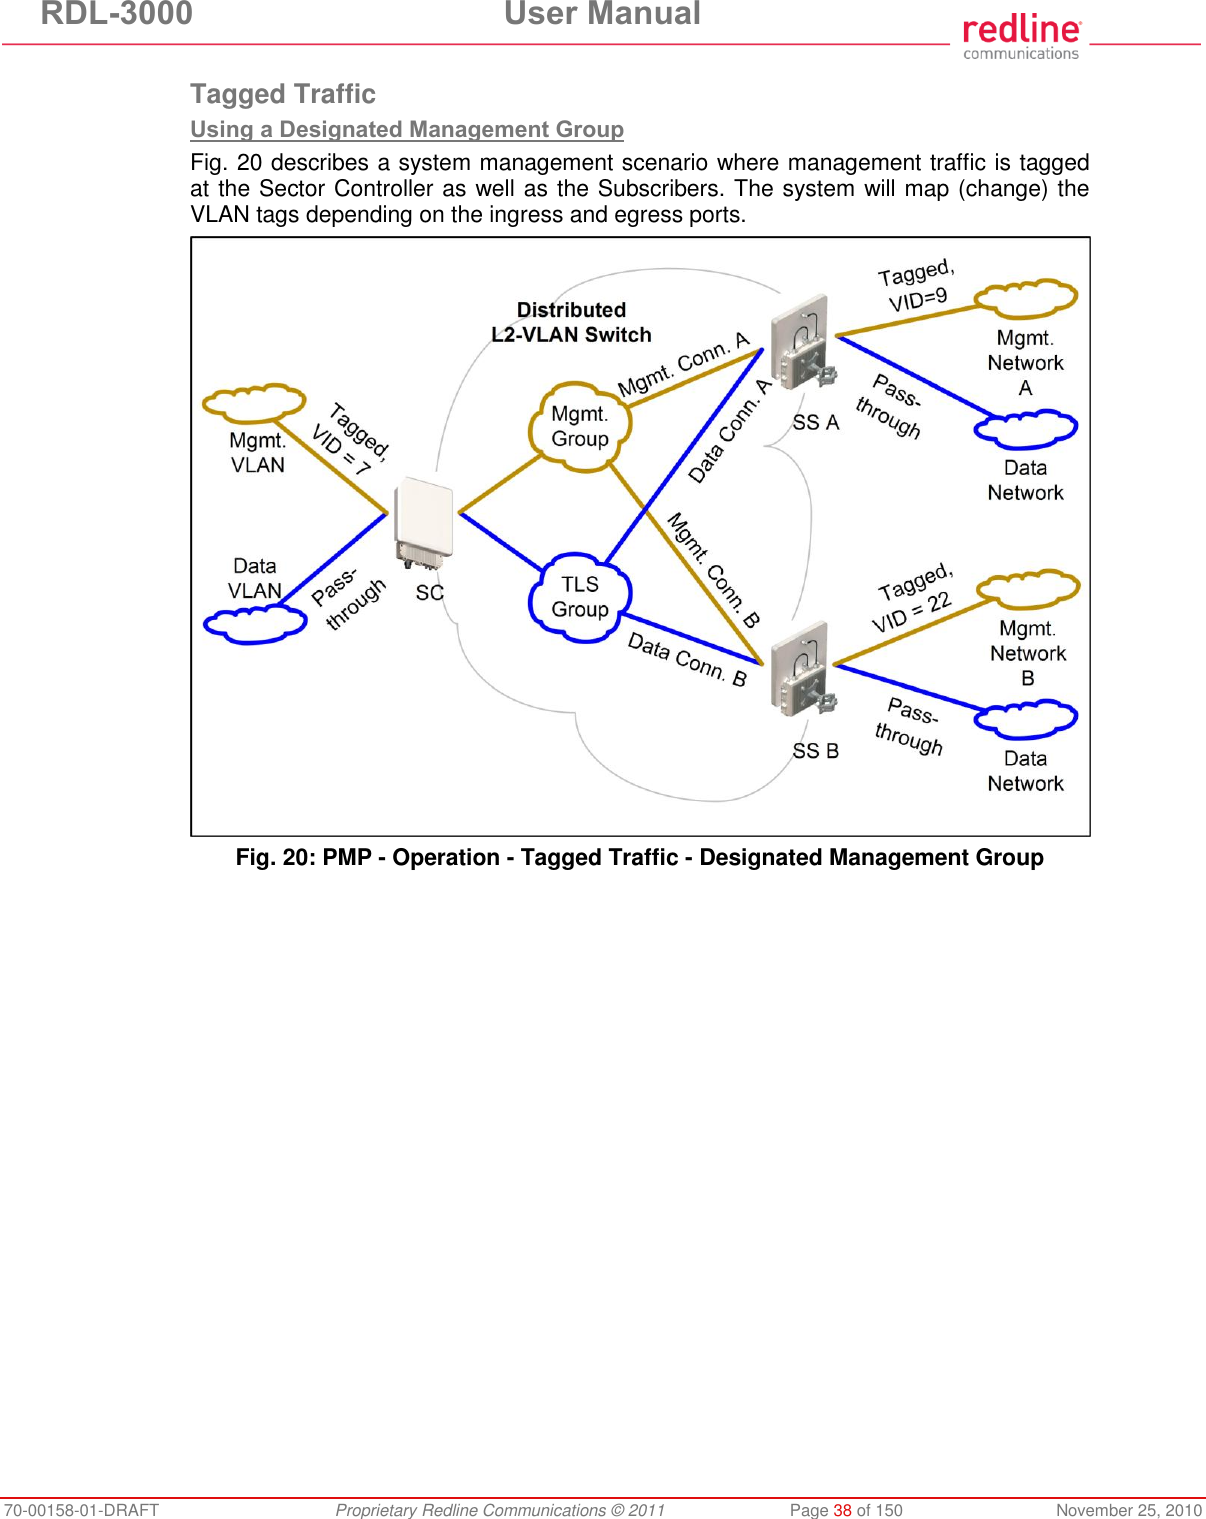 RDL-3000  User Manual 70-00158-01-DRAFT  Proprietary Redline Communications © 2011  Page 38 of 150  November 25, 2010  Tagged Traffic Using a Designated Management Group Fig. 20 describes a system management scenario where management traffic is tagged at the Sector Controller as well as the Subscribers. The system will map (change) the VLAN tags depending on the ingress and egress ports.  Fig. 20: PMP - Operation - Tagged Traffic - Designated Management Group 